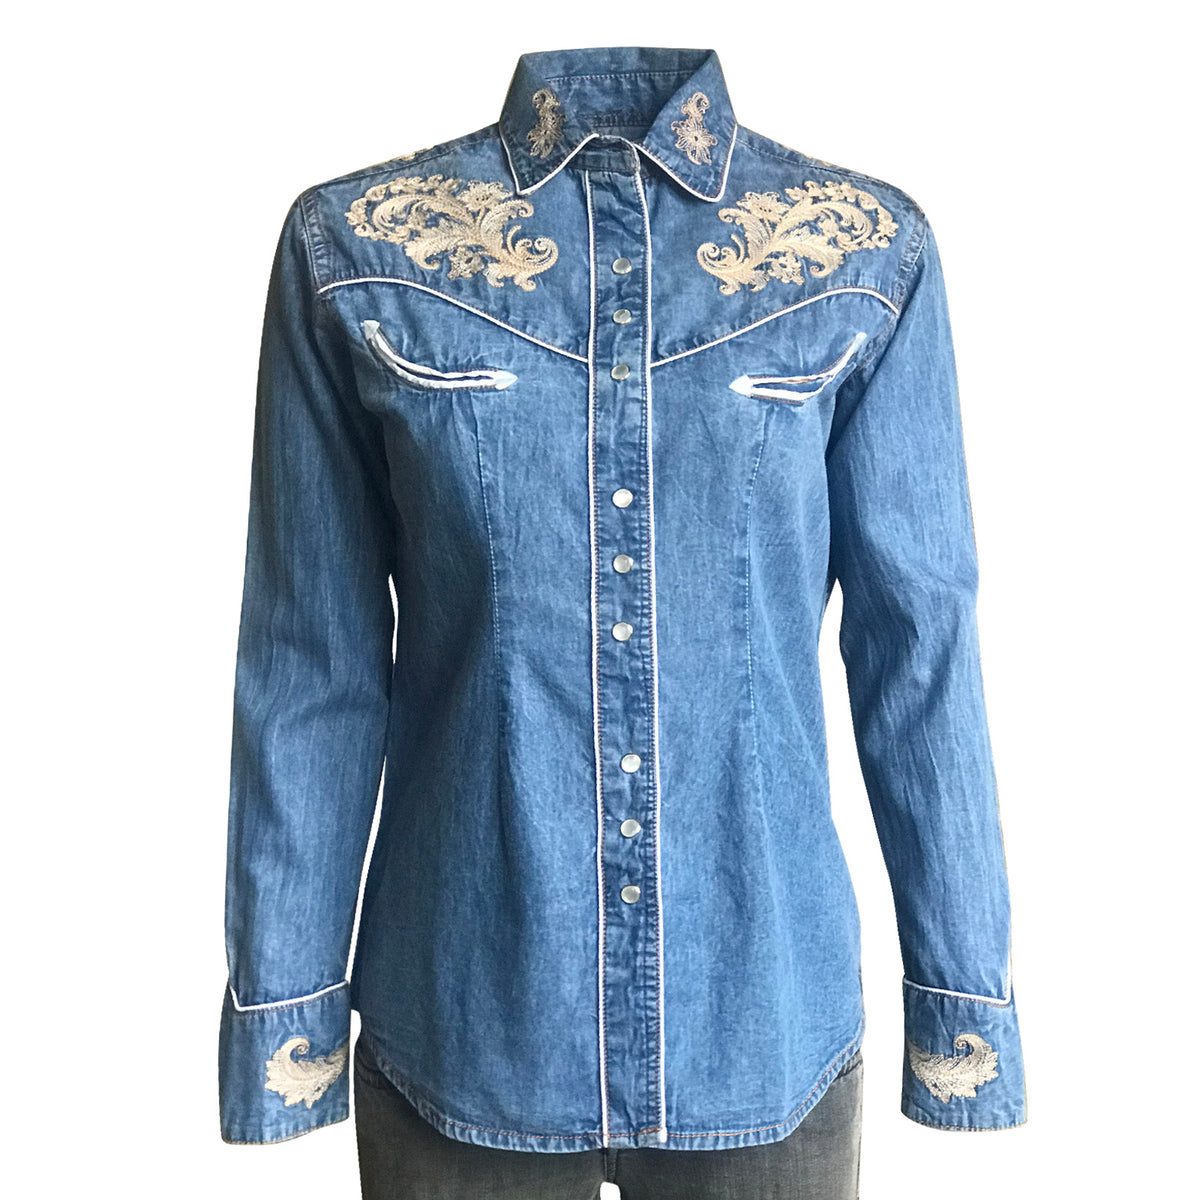 Women’s Vintage Denim Western Shirt with Floral Embroidery - Rockmount